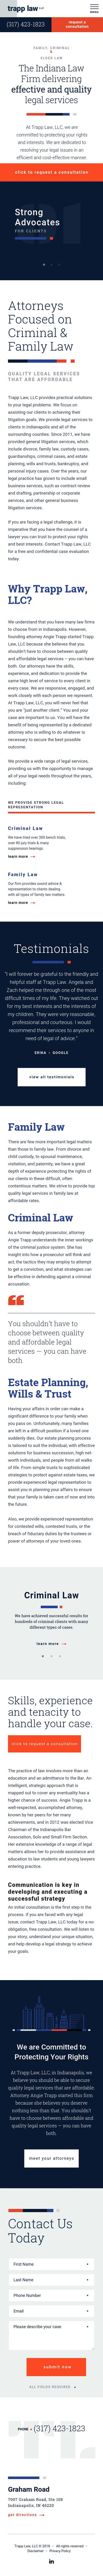 Trapp Law, LLC - Indianapolis IN Lawyers